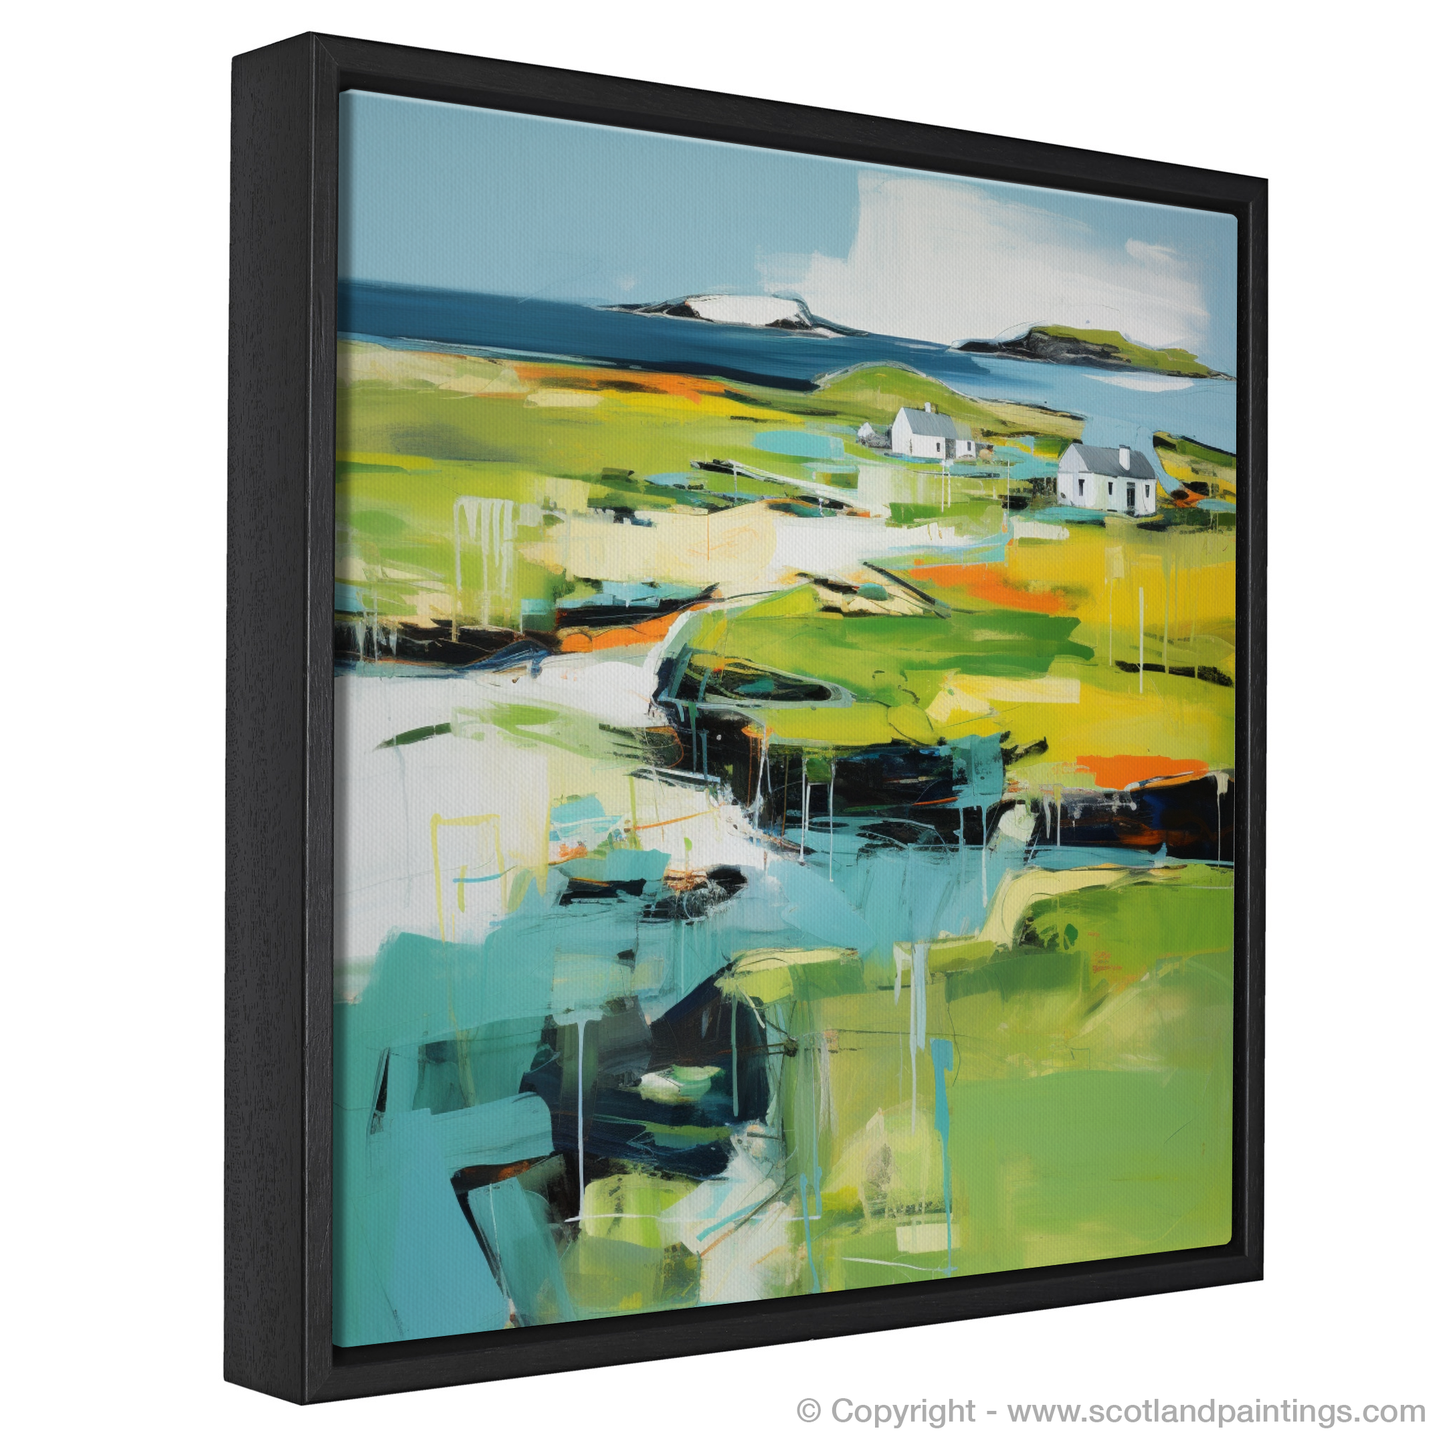 Painting and Art Print of Isle of Lewis, Outer Hebrides in summer entitled "Summer Vibrance on Isle of Lewis".